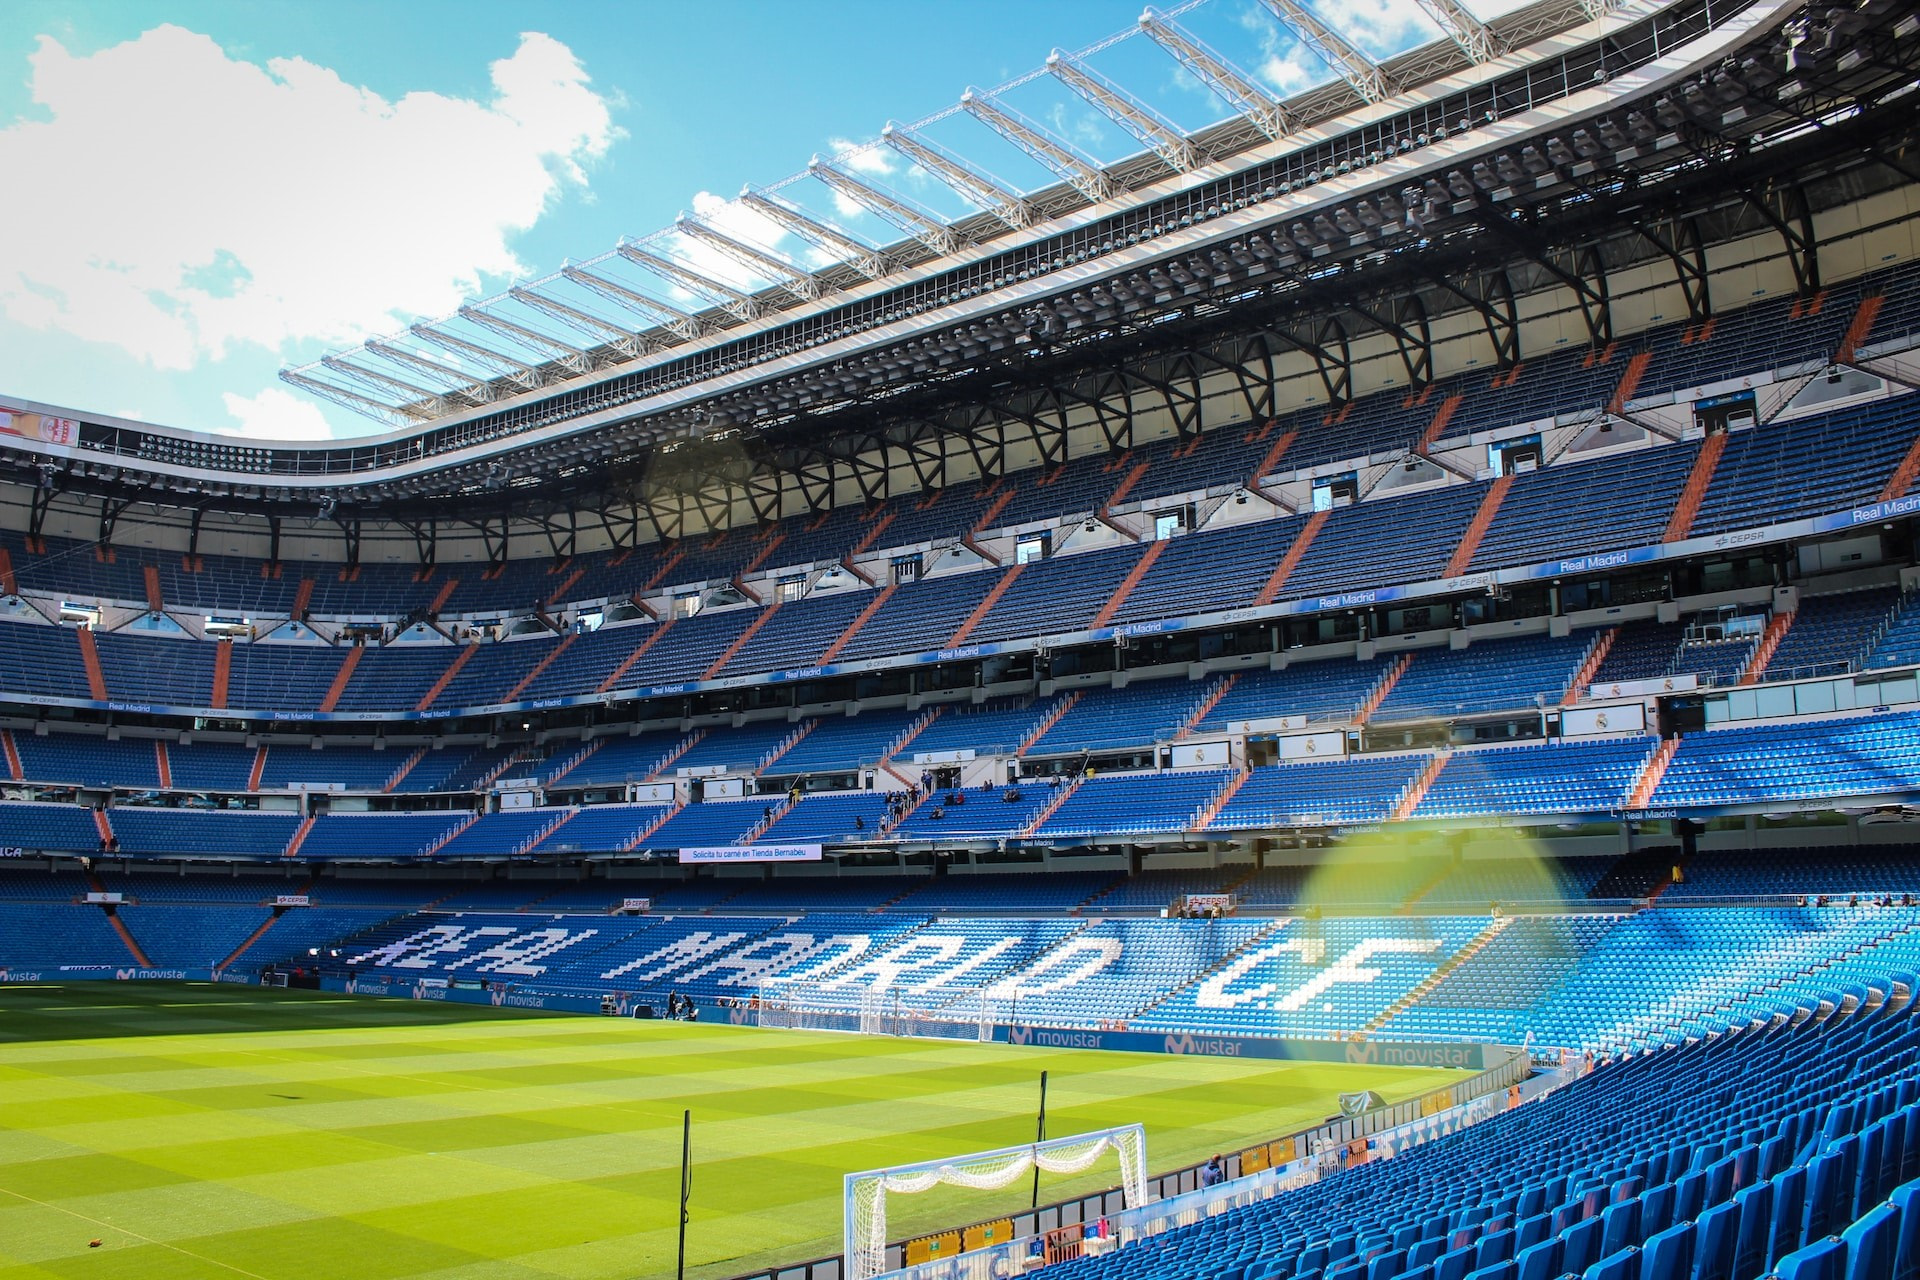 Real Madrid stadium in the daytime.